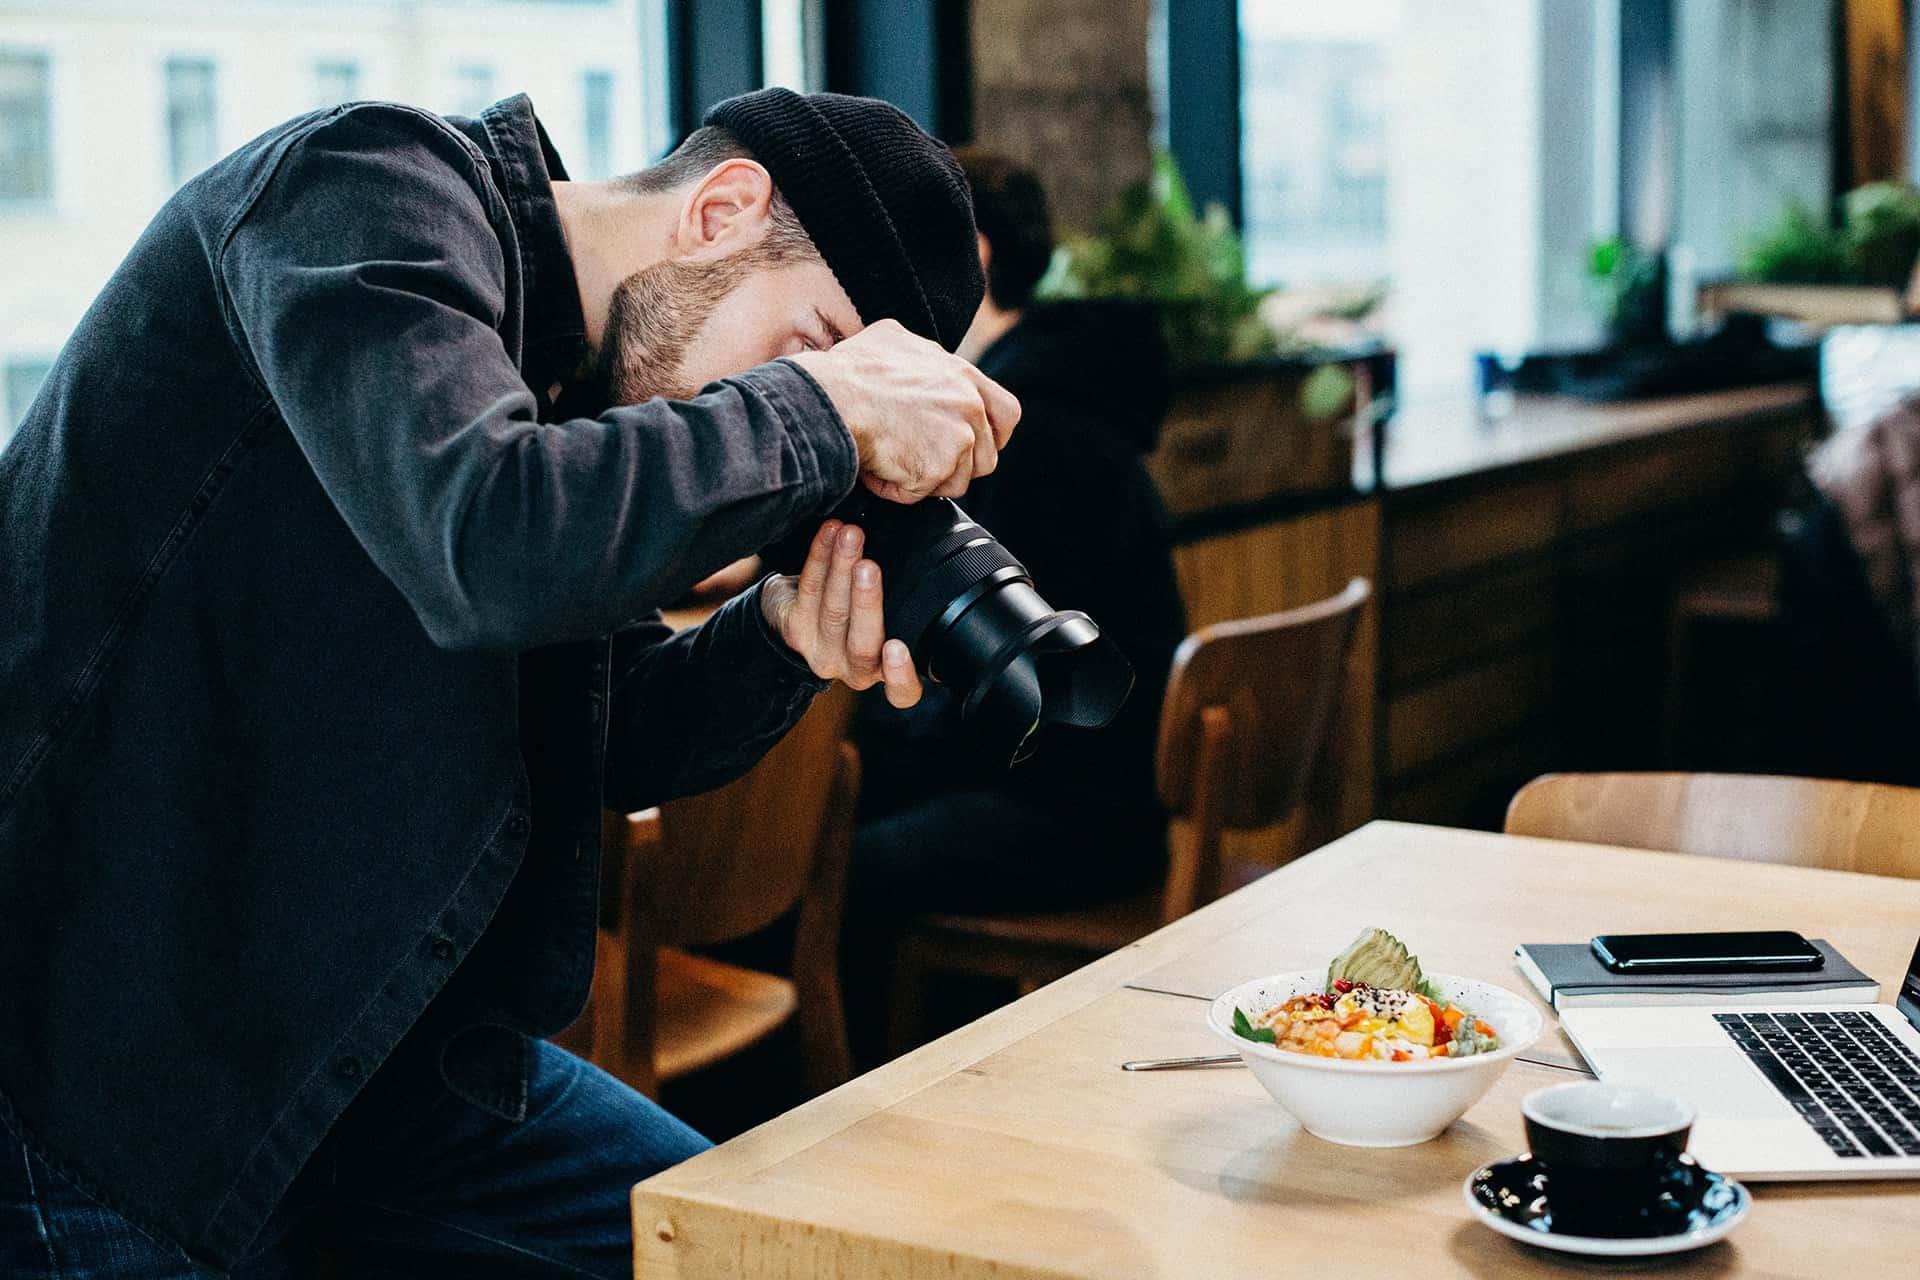 You are currently viewing 5 Food Photography Tips